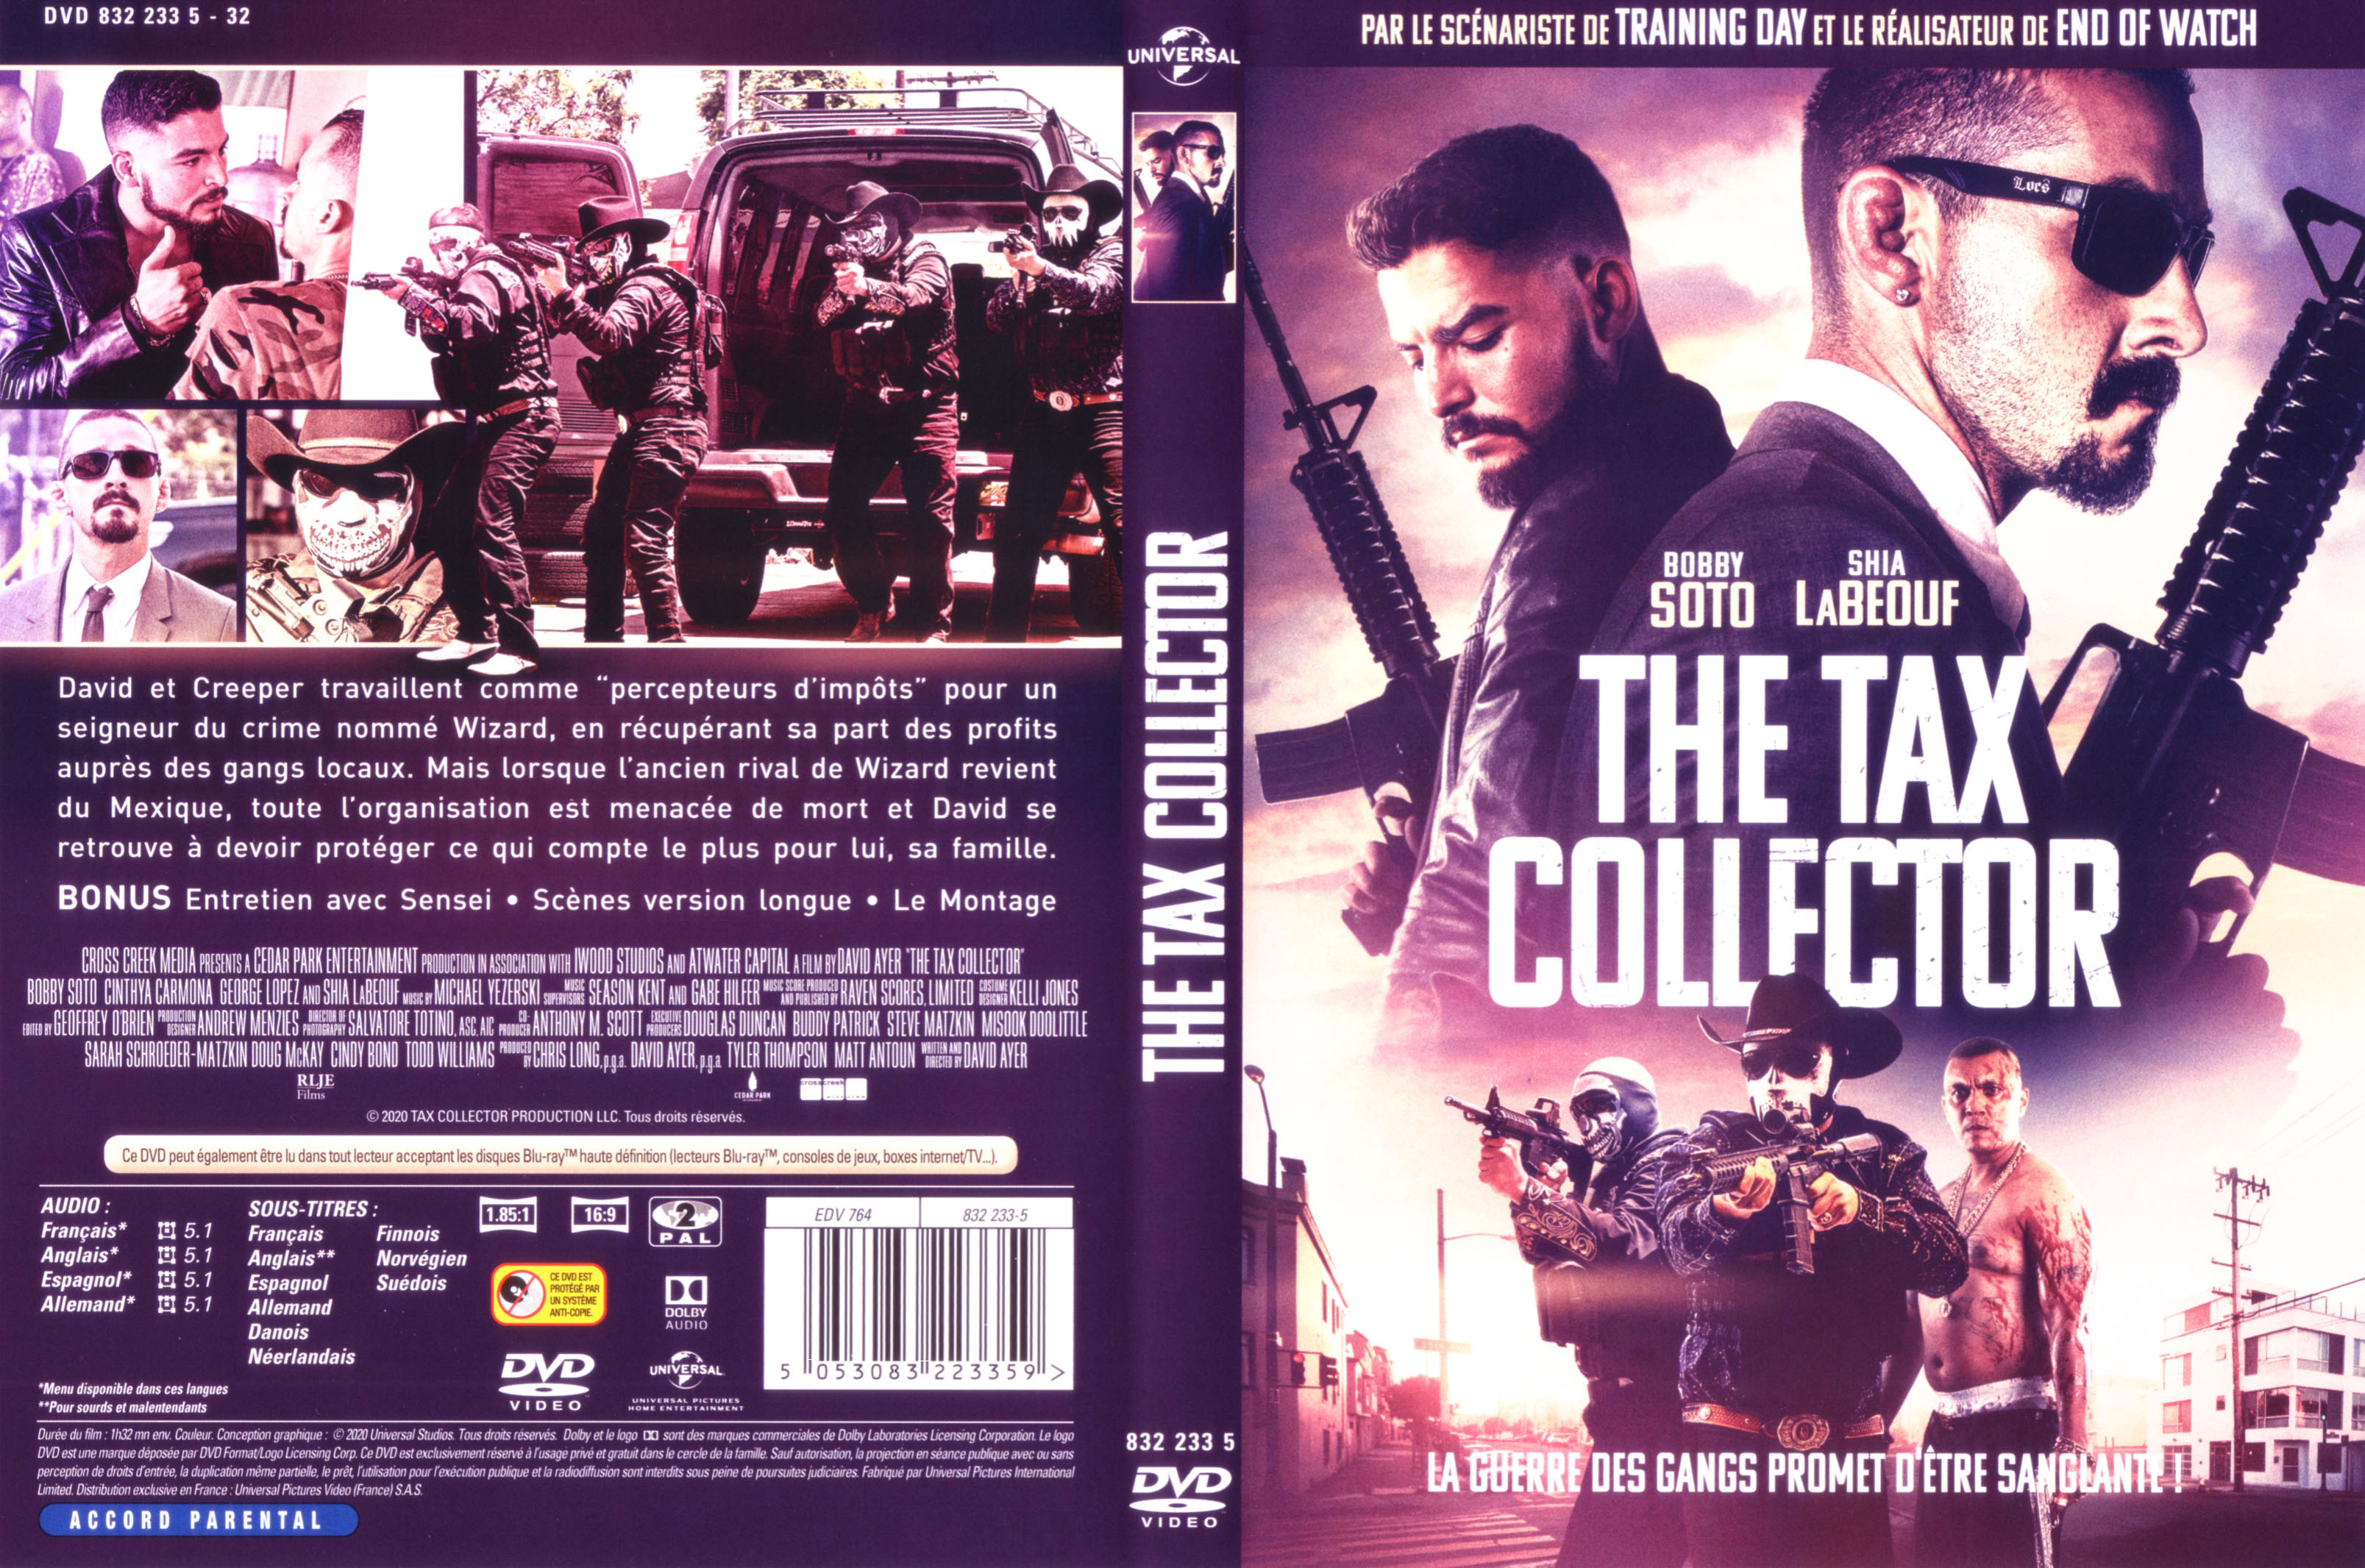 Jaquette DVD The tax collector